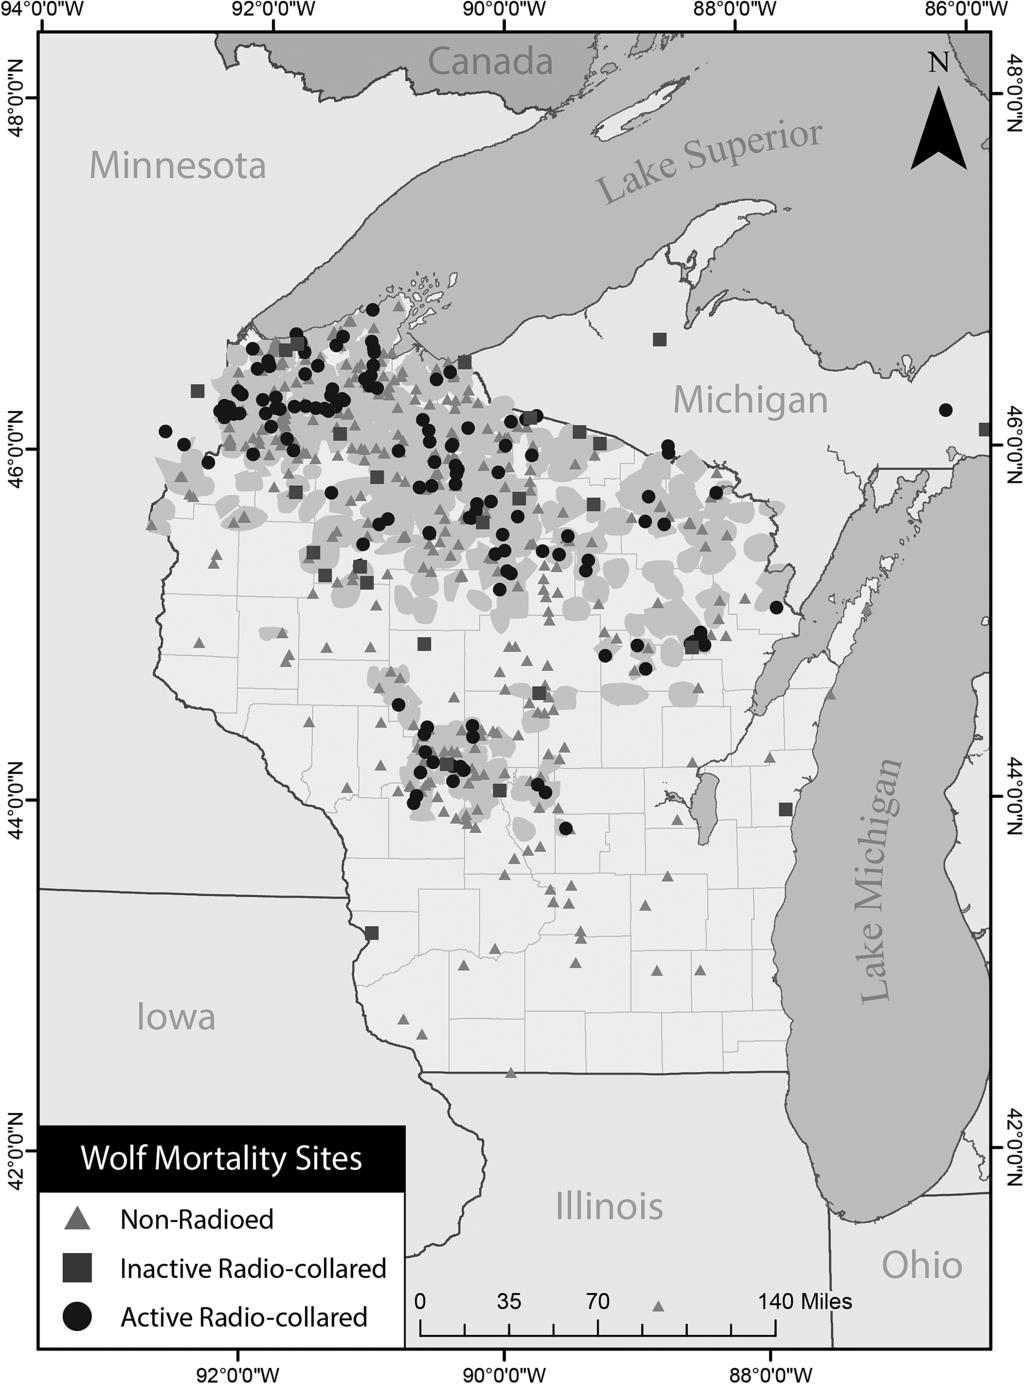 22 JOURNAL OF MAMMALOGY When > 1 county was listed, we randomly assigned one of the counties.